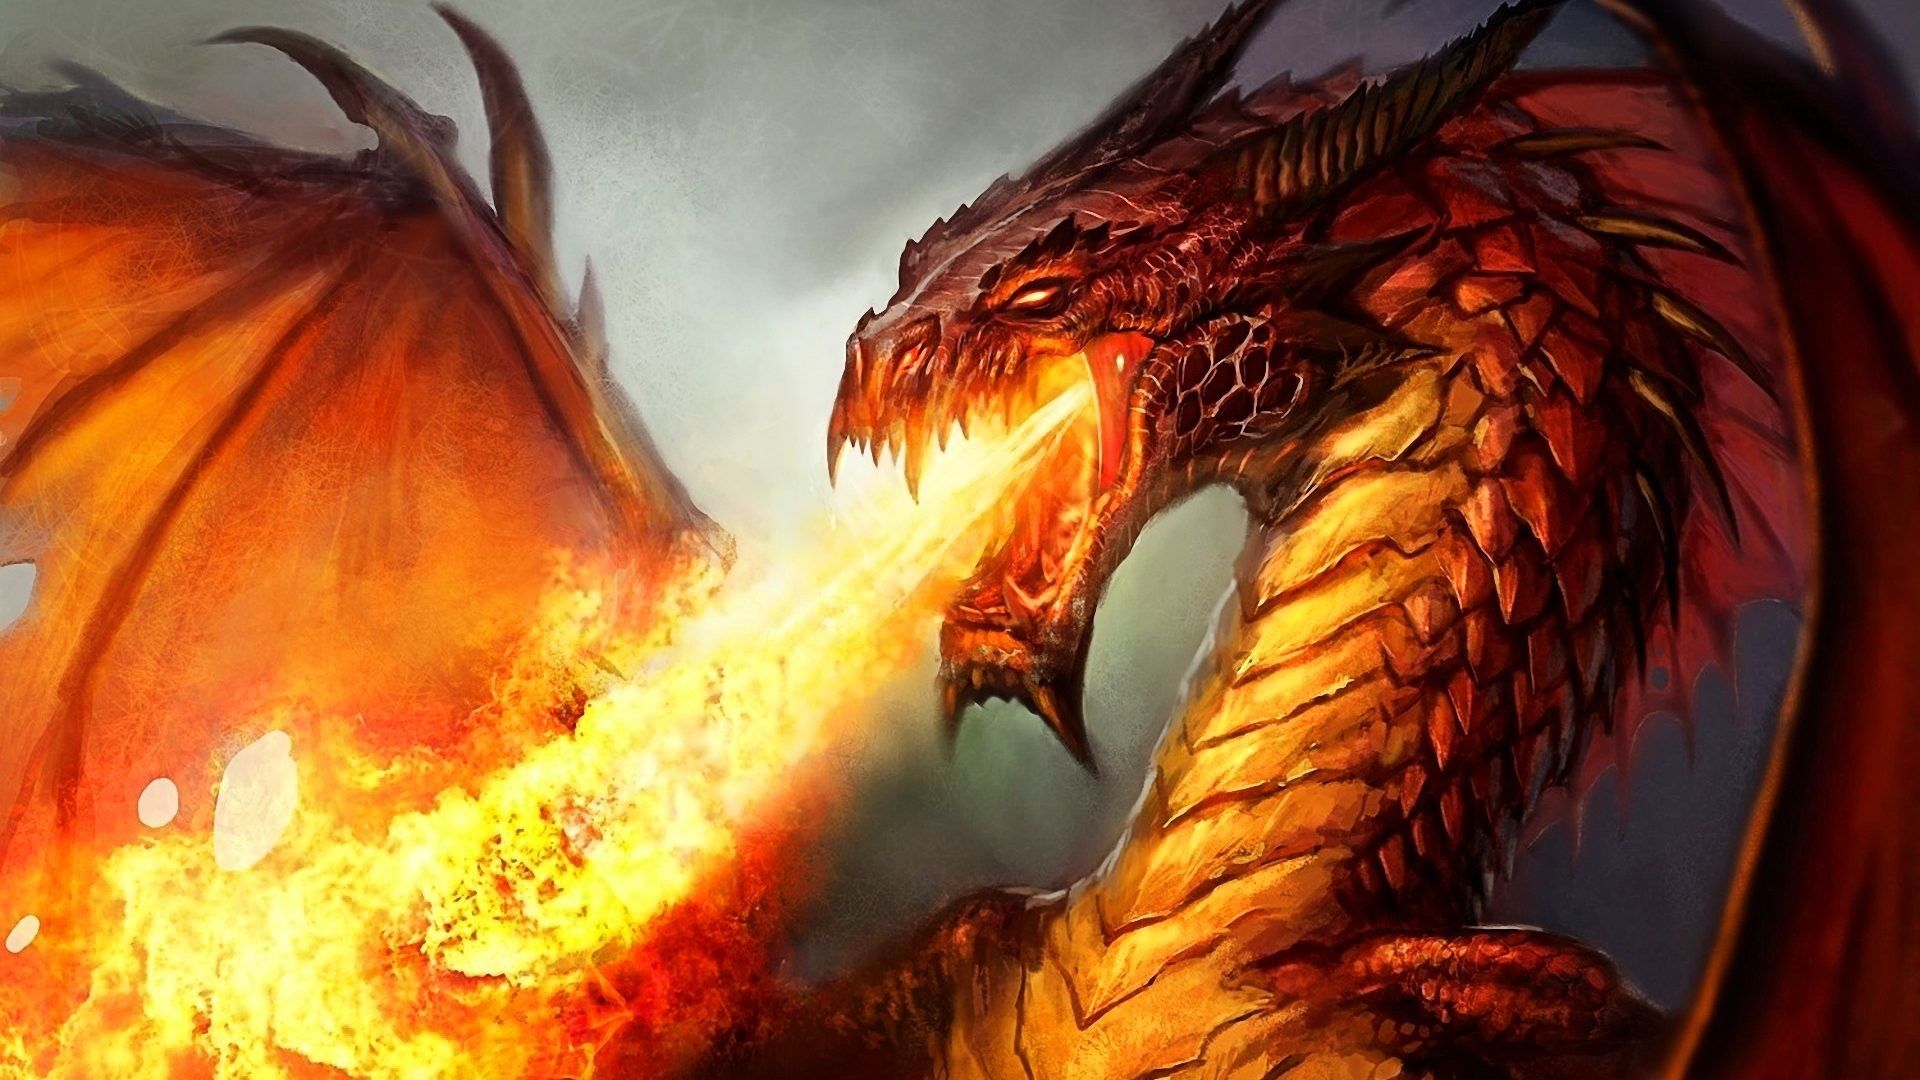 Dragon HD Wallpaper background picture